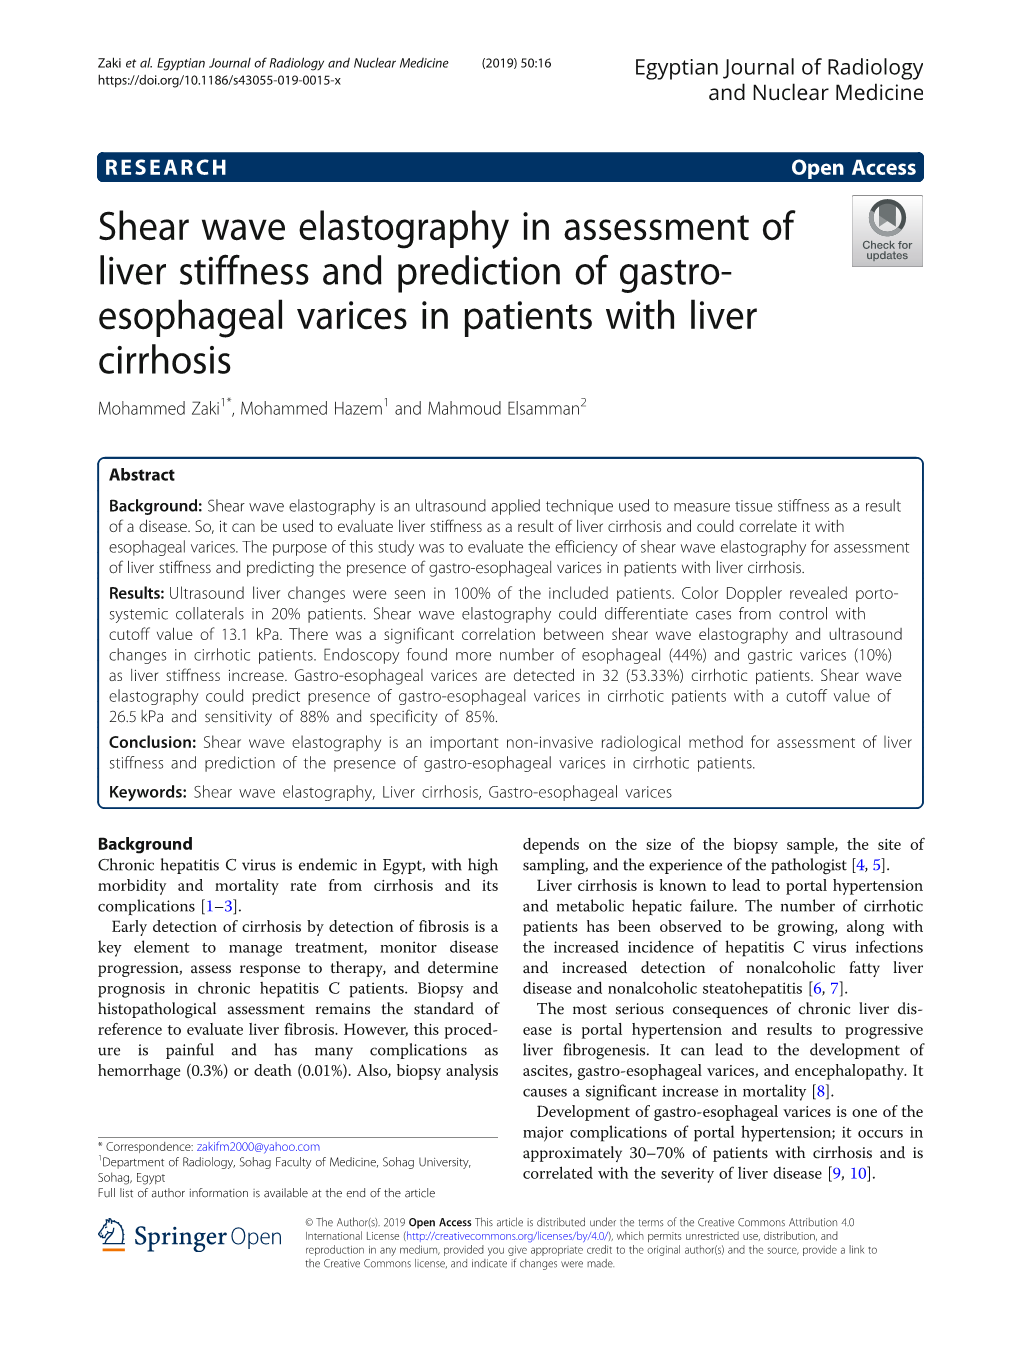 Shear Wave Elastography in Assessment of Liver Stiffness And